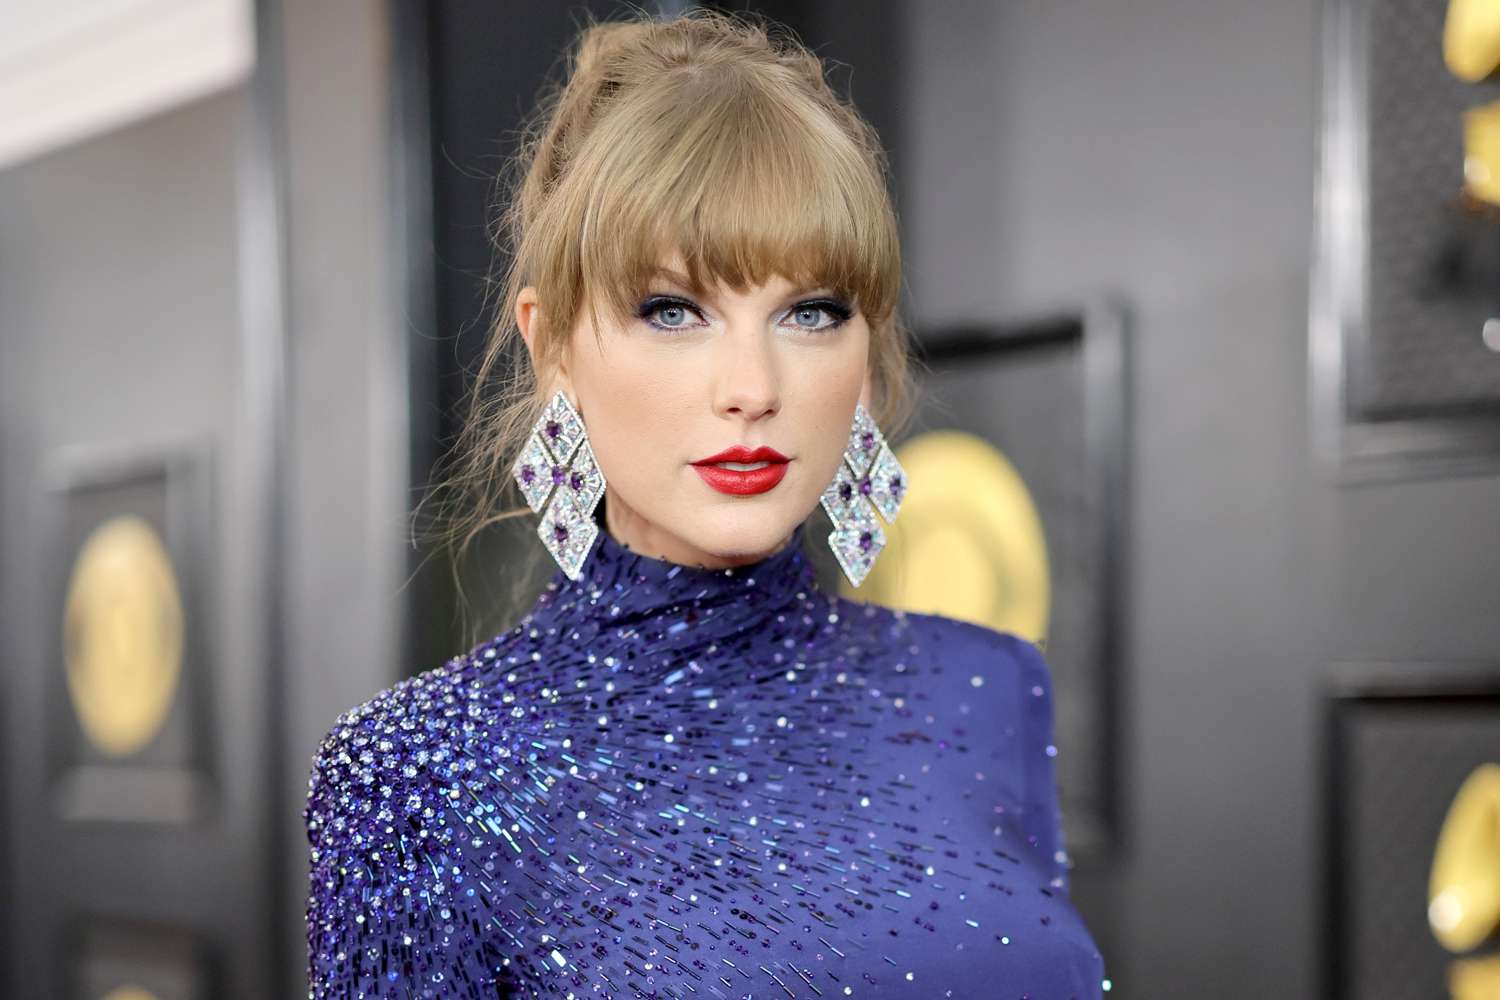 Taylor Swift Premiere Turns Into Star-Studded Affair With Fans And Celebs Alike